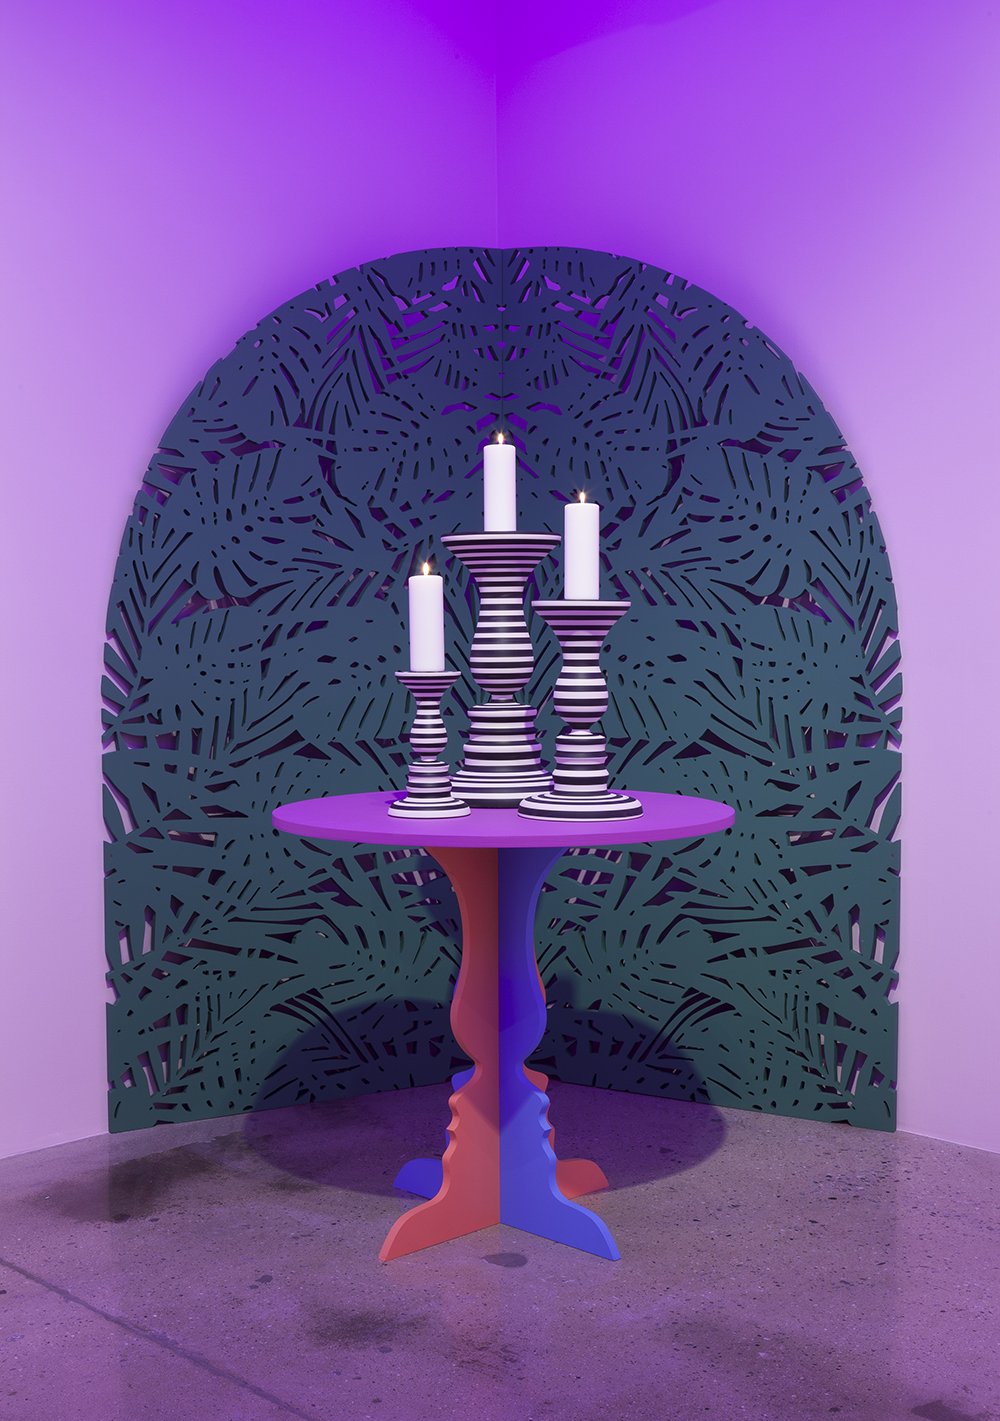 Greg Ito, <i>Table and Candles</i> (2016). Installation view. Image courtesy the artist and Steve Turner, Los Angeles